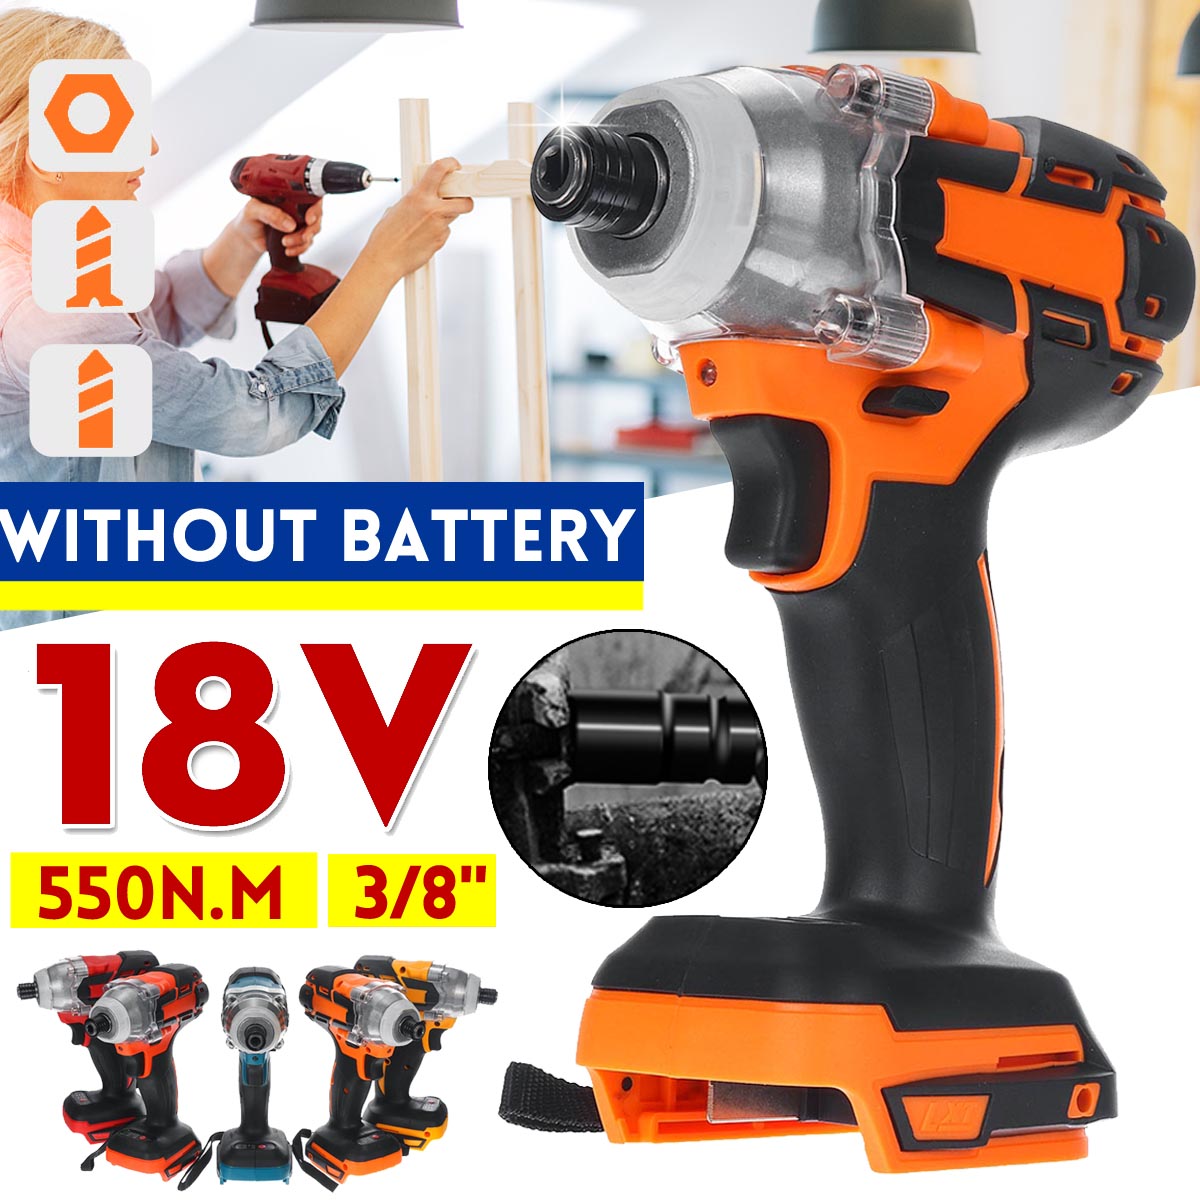 38quot-Brushless-Impact-Wrench-Cordless-550NM-High-Torque-For-18V-Battery-1789863-1